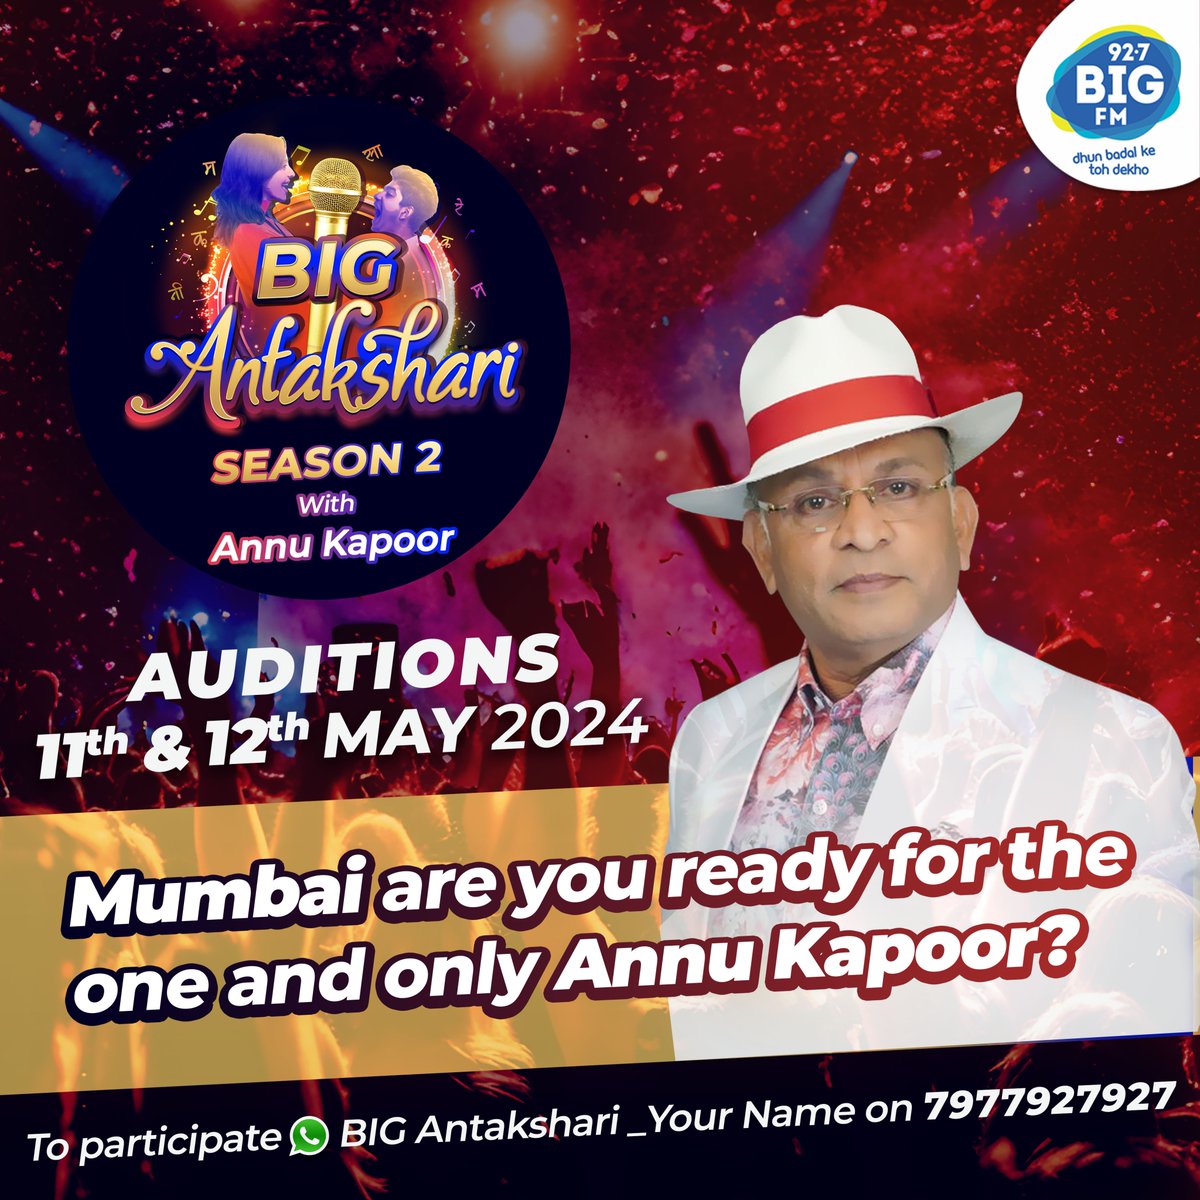 🎶 Get ready to show off your singing skills! 🎤 BIG Antakshari Season 2 Auditions are happening in Mumbai! 🌟 Don't miss your chance to be a part of the musical extravaganza! 🎶✨ #BIGAntakshari #Season2 #Auditions #Mumbai